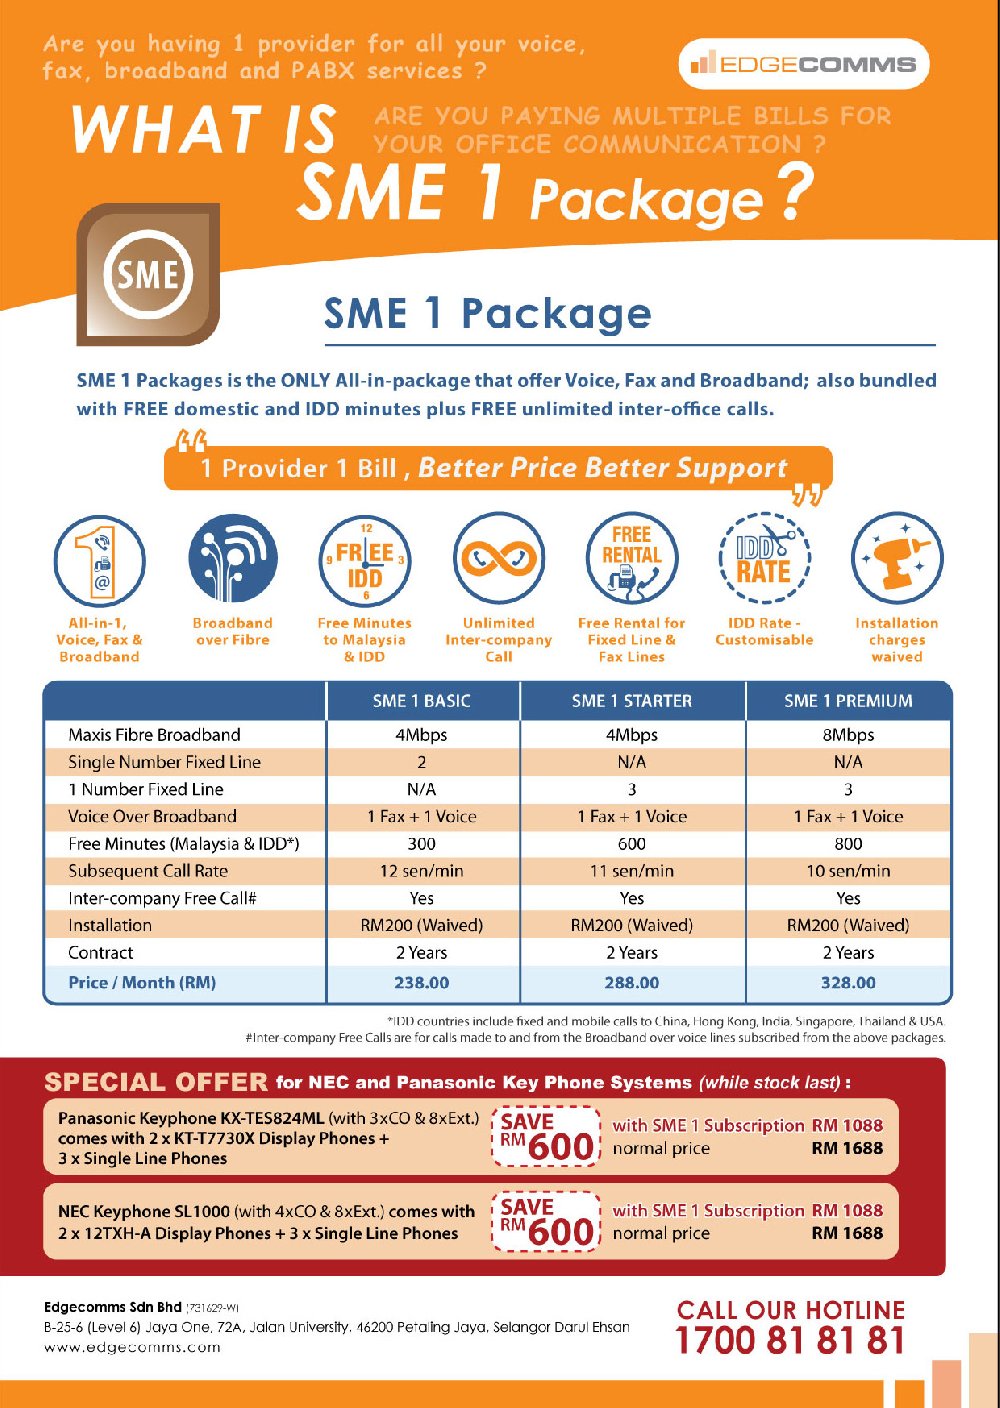 Edgecomms SME 1 Package